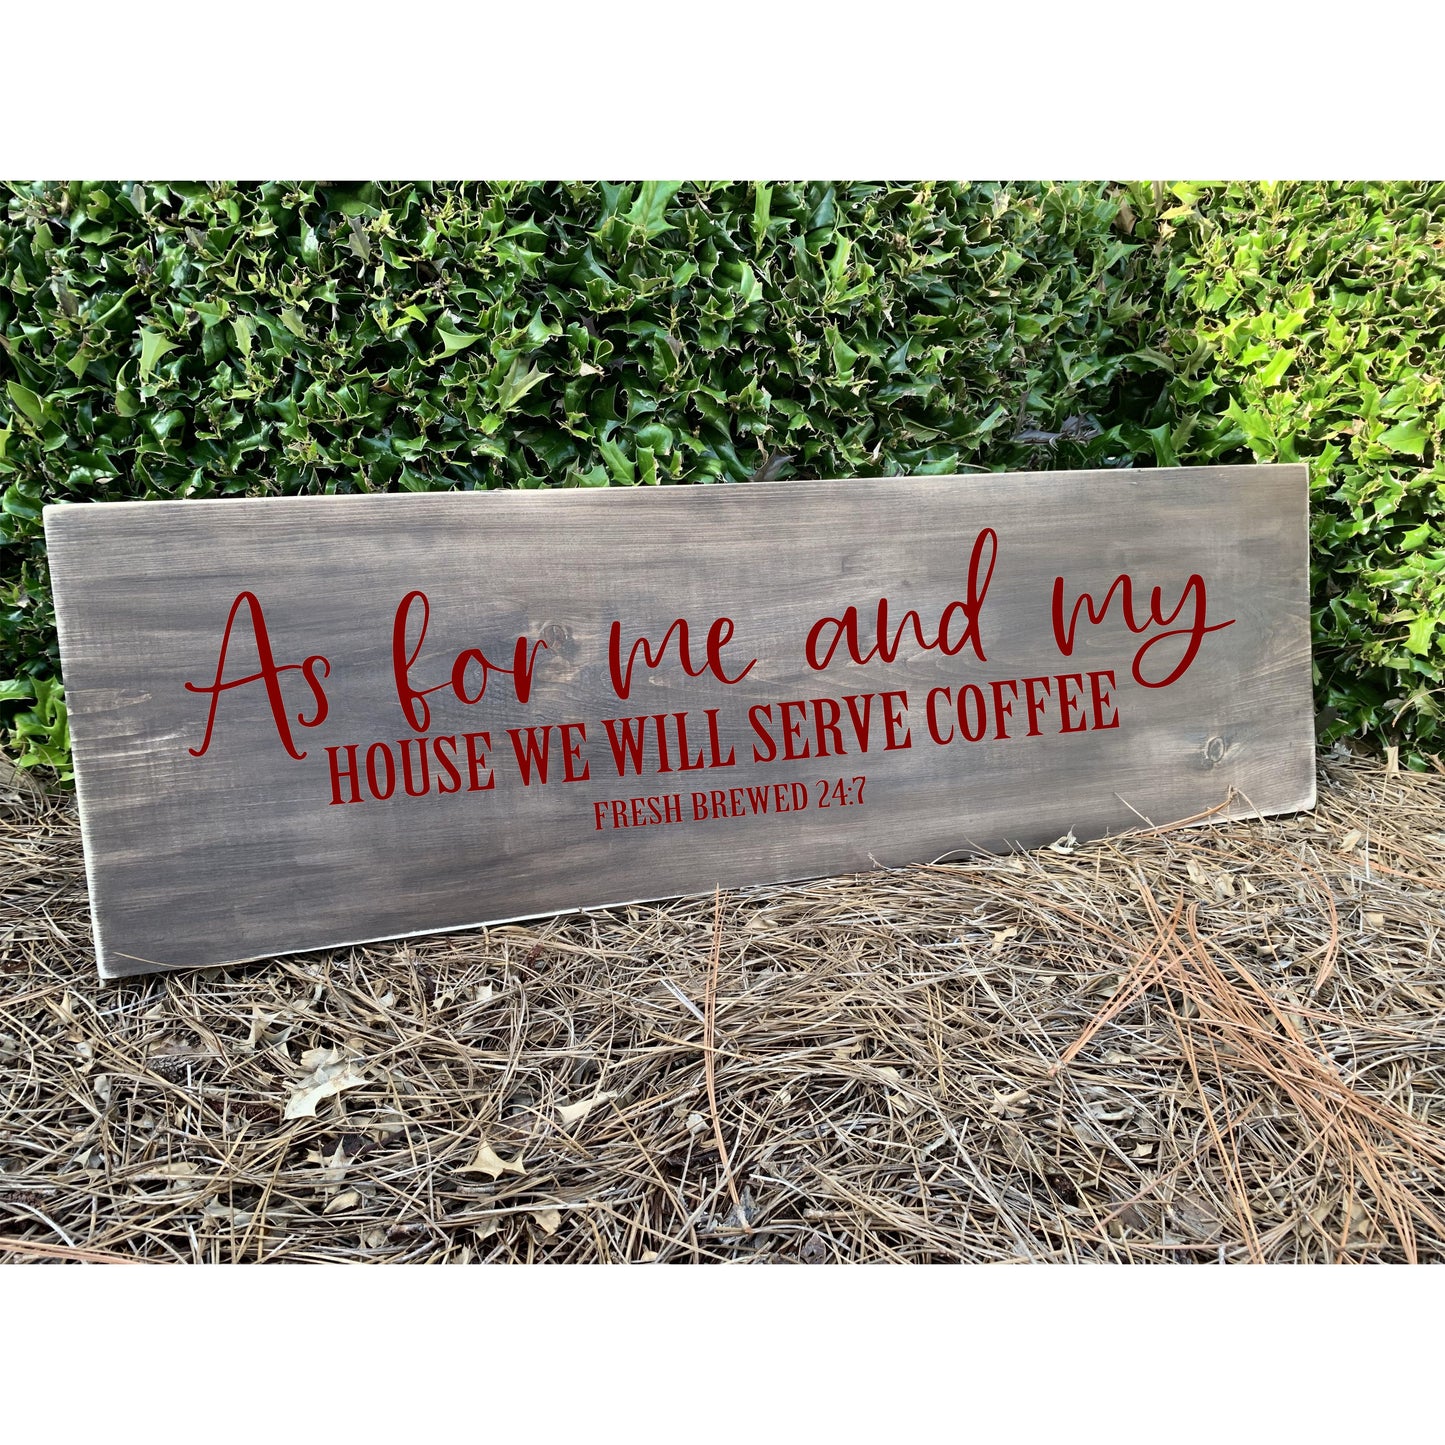 DOUBLE BOARD PLANK SIGN